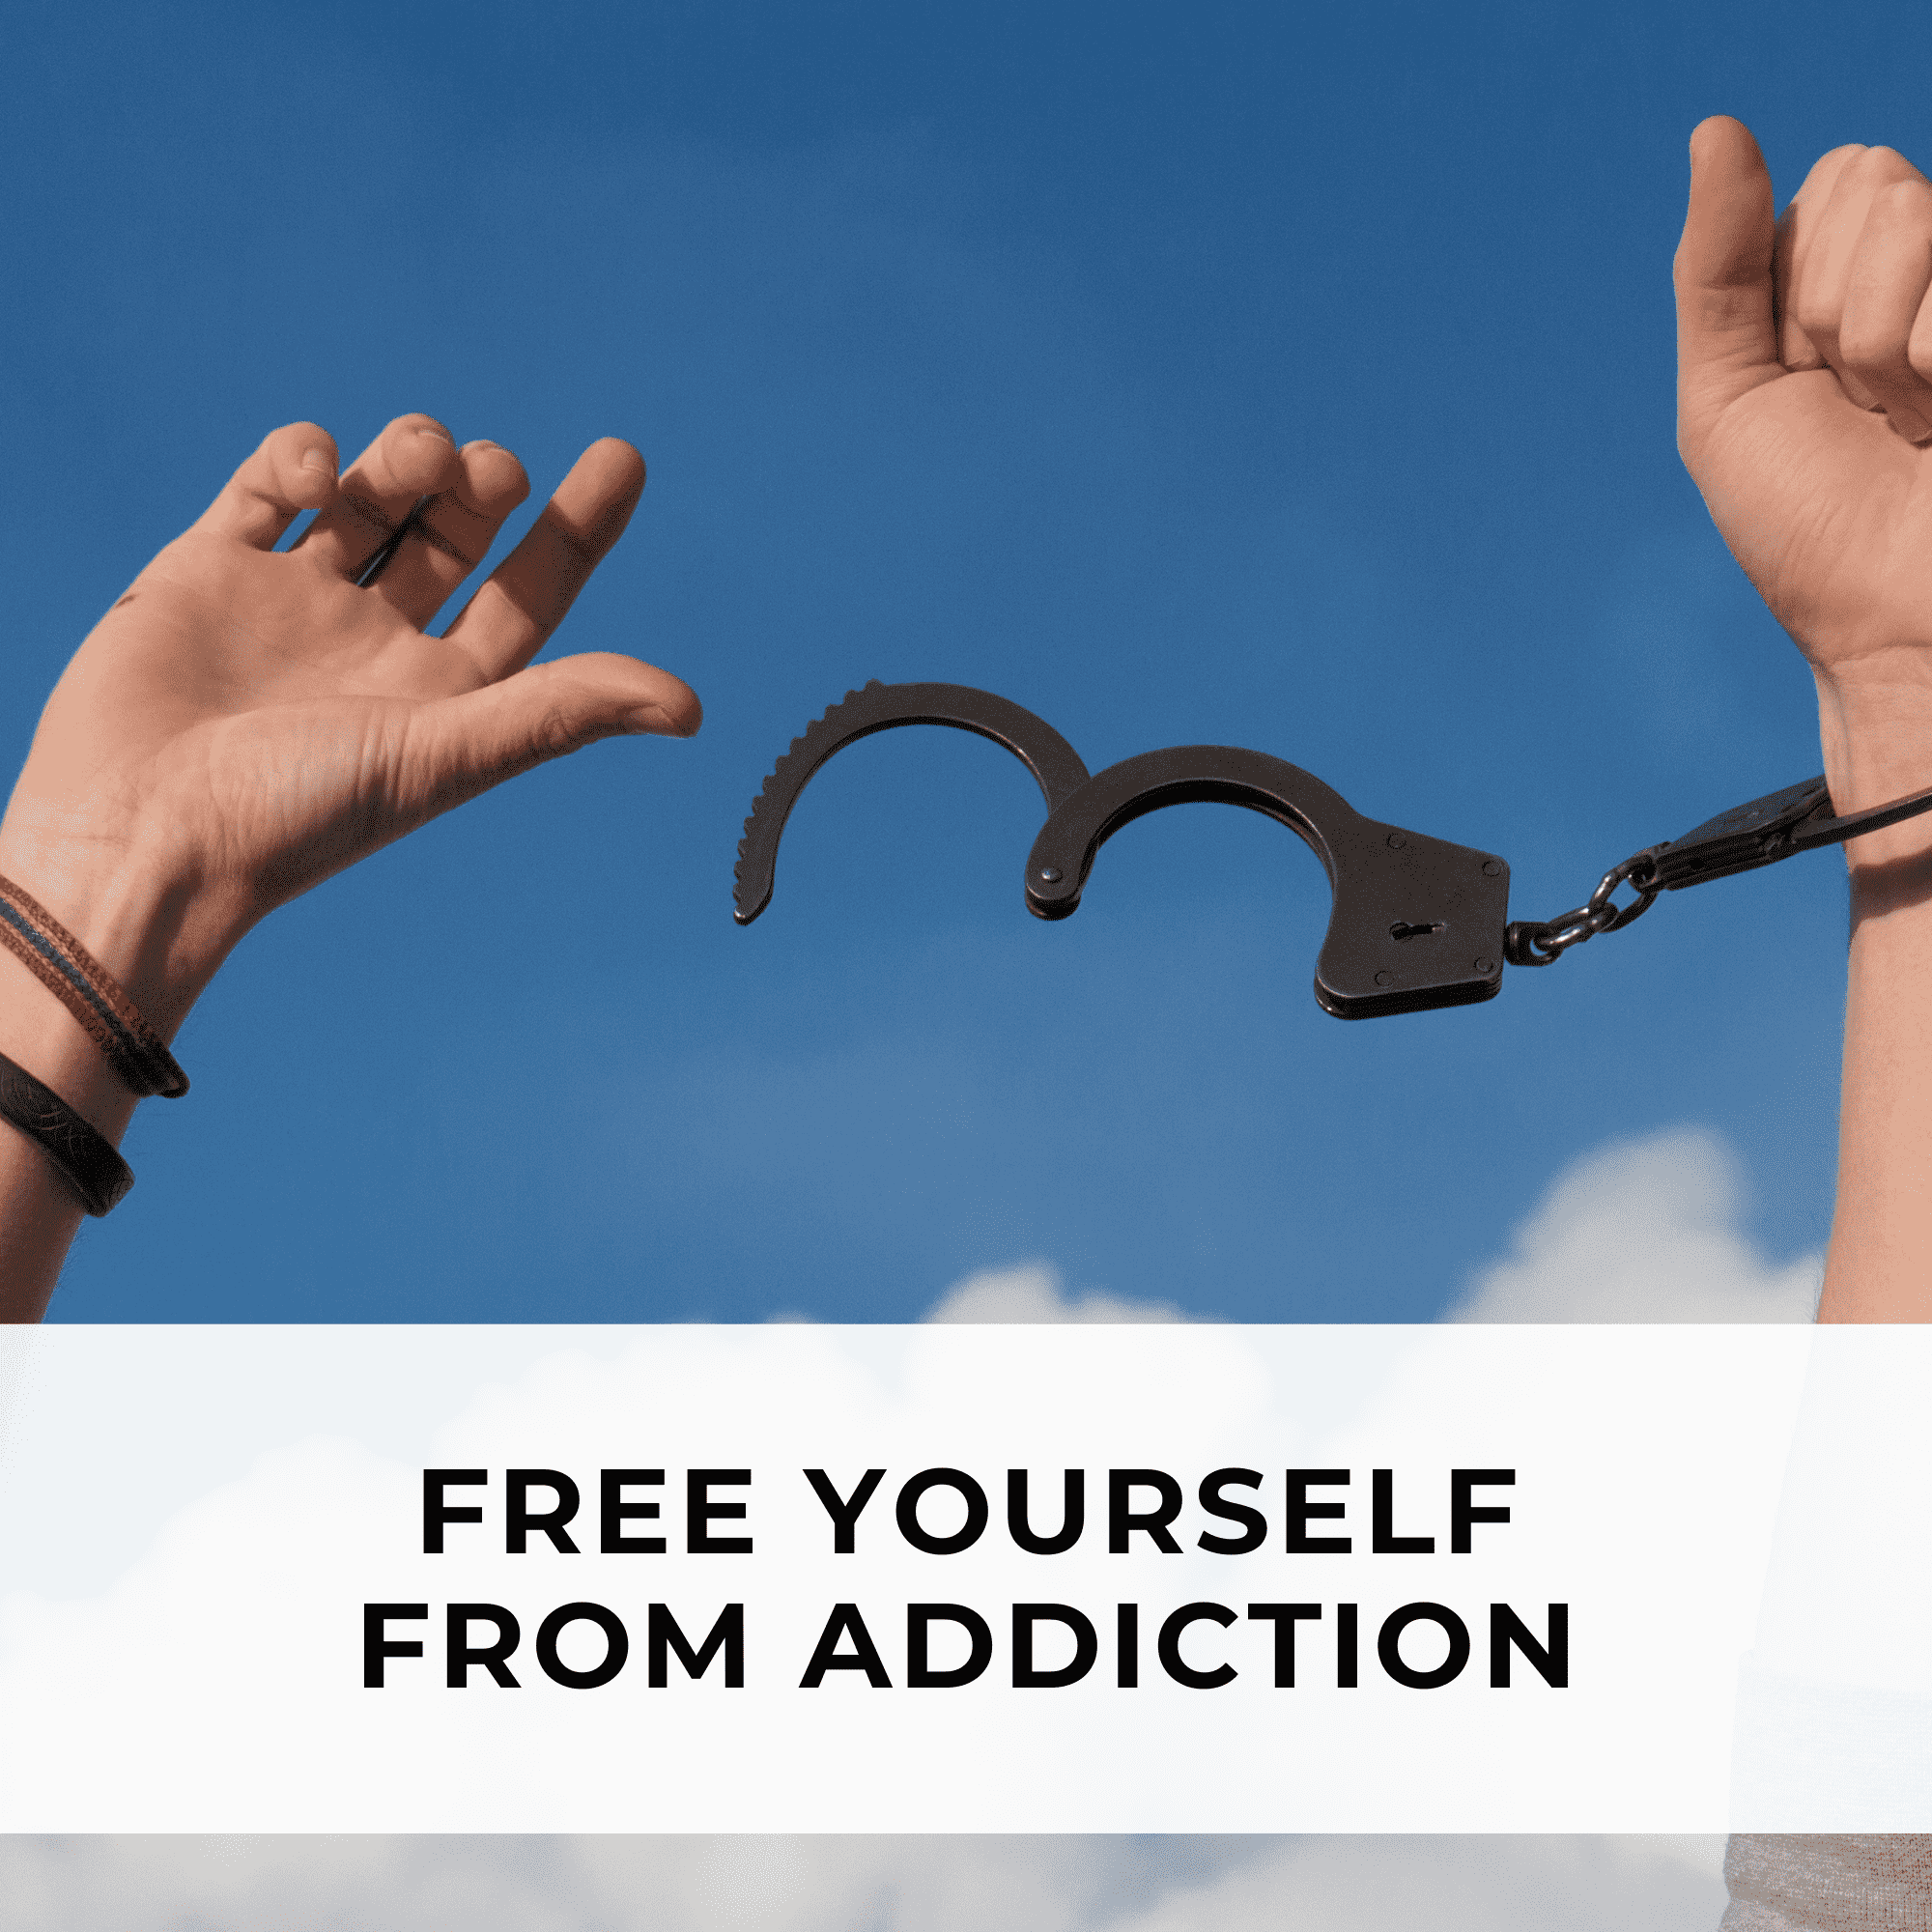 Free yourself from addiction